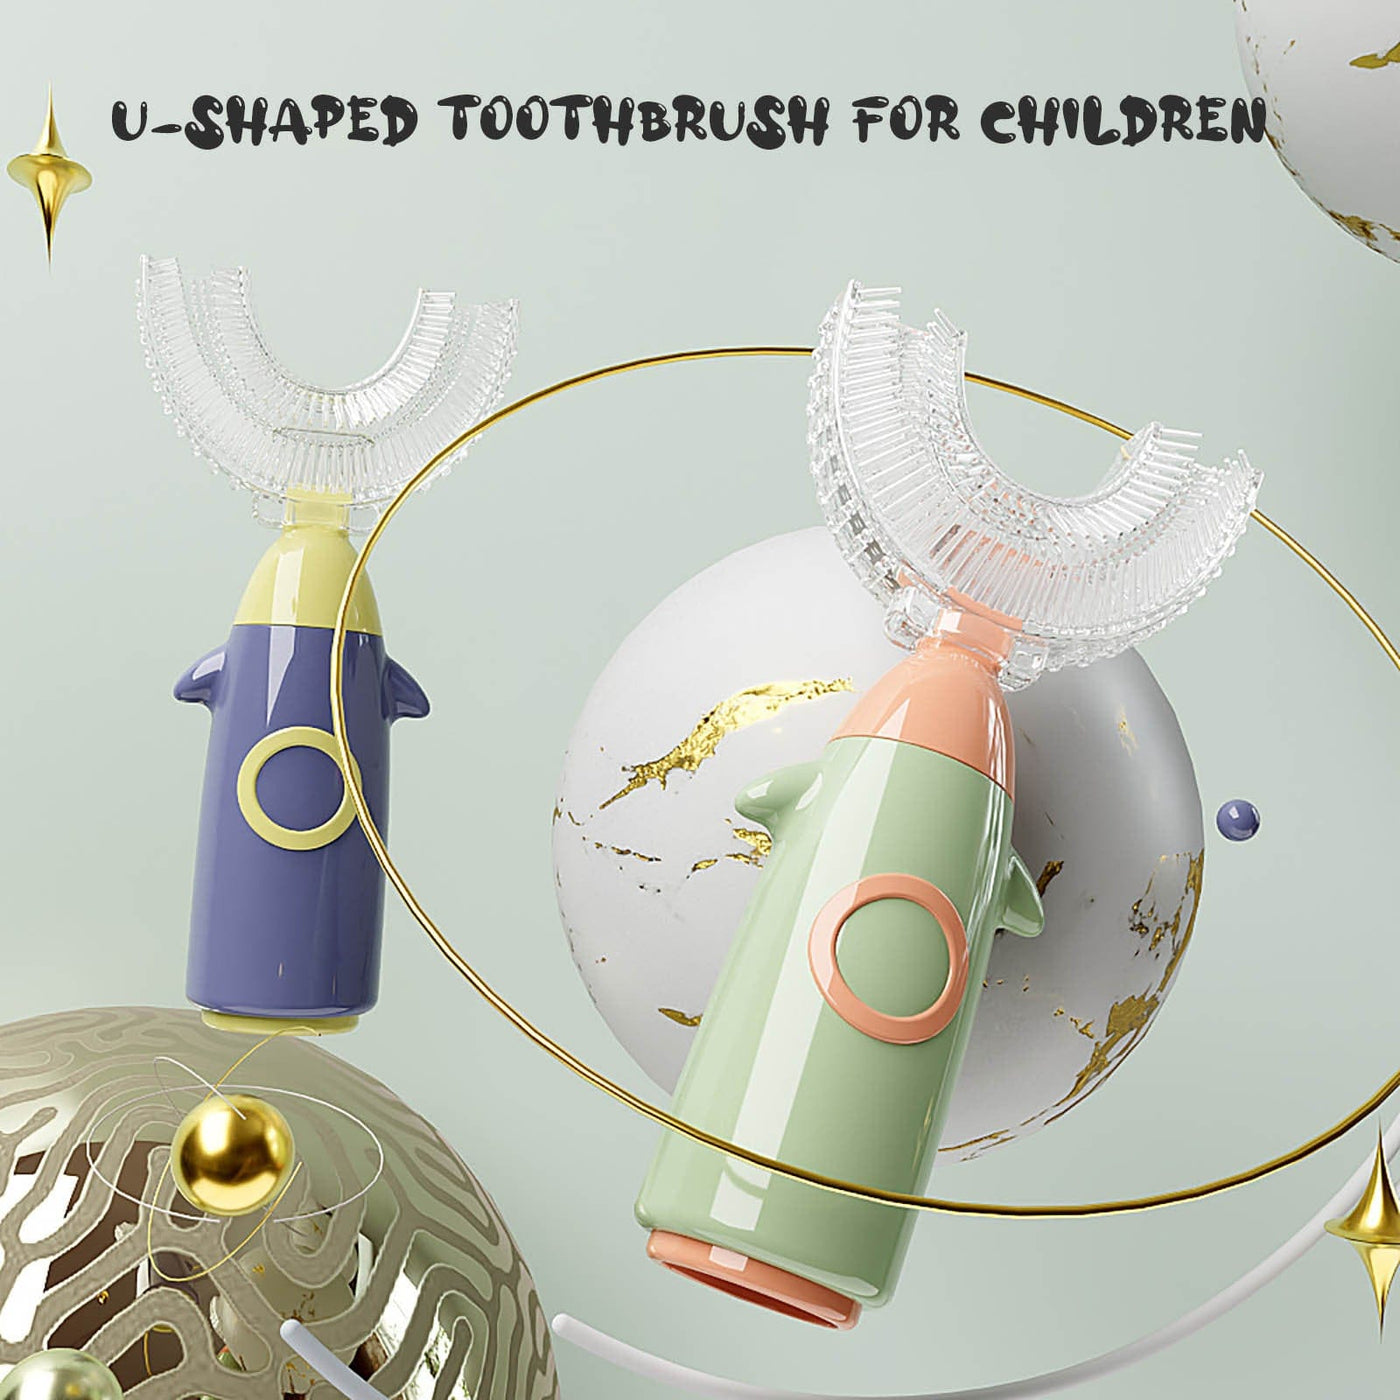 Manual Children's U-shaped Toothbrush Silicone Toothbrush Soft Bristles Mouth Cleaning U-shaped Silicone Manual Children's Toothbrush Rswank